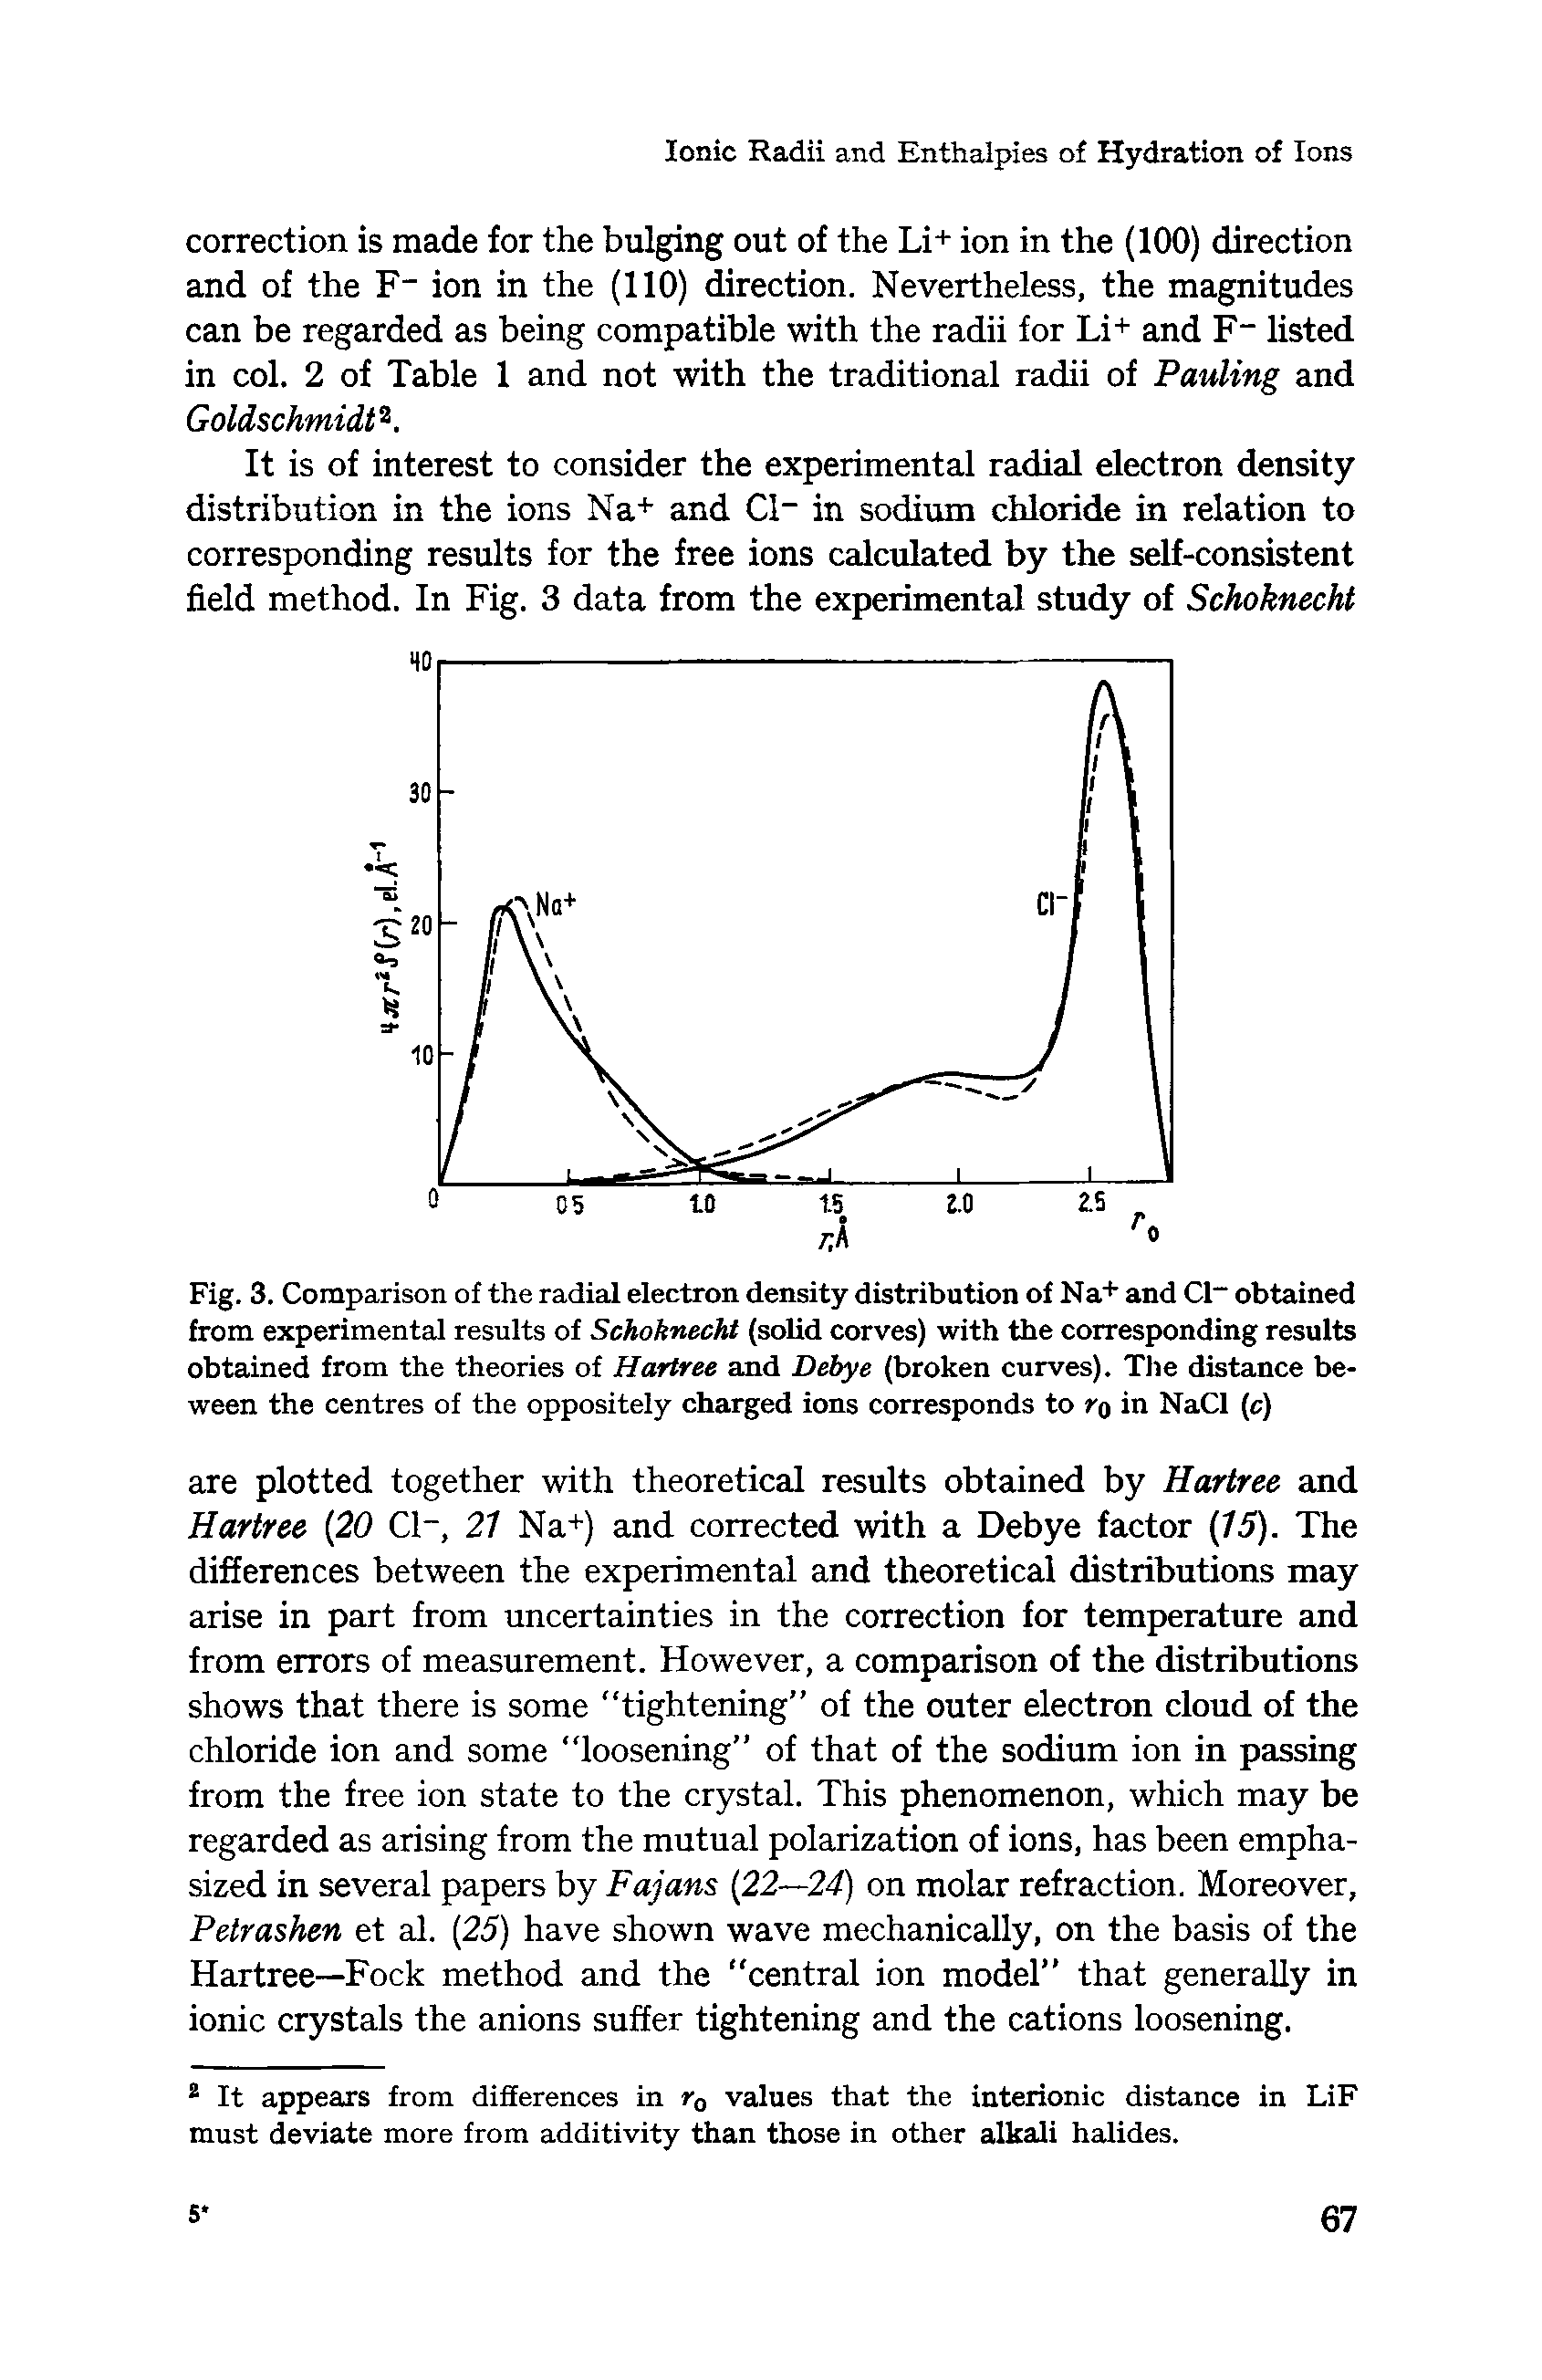 Fig. 3. Comparison of the radial electron density distribution of Na+ and Cl- obtained from experimental results of Schoknecht (solid corves) with the corresponding results obtained from the theories of Hartree and Debye (broken curves). The distance be-ween the centres of the oppositely charged ions corresponds to ro in NaCl (c)...